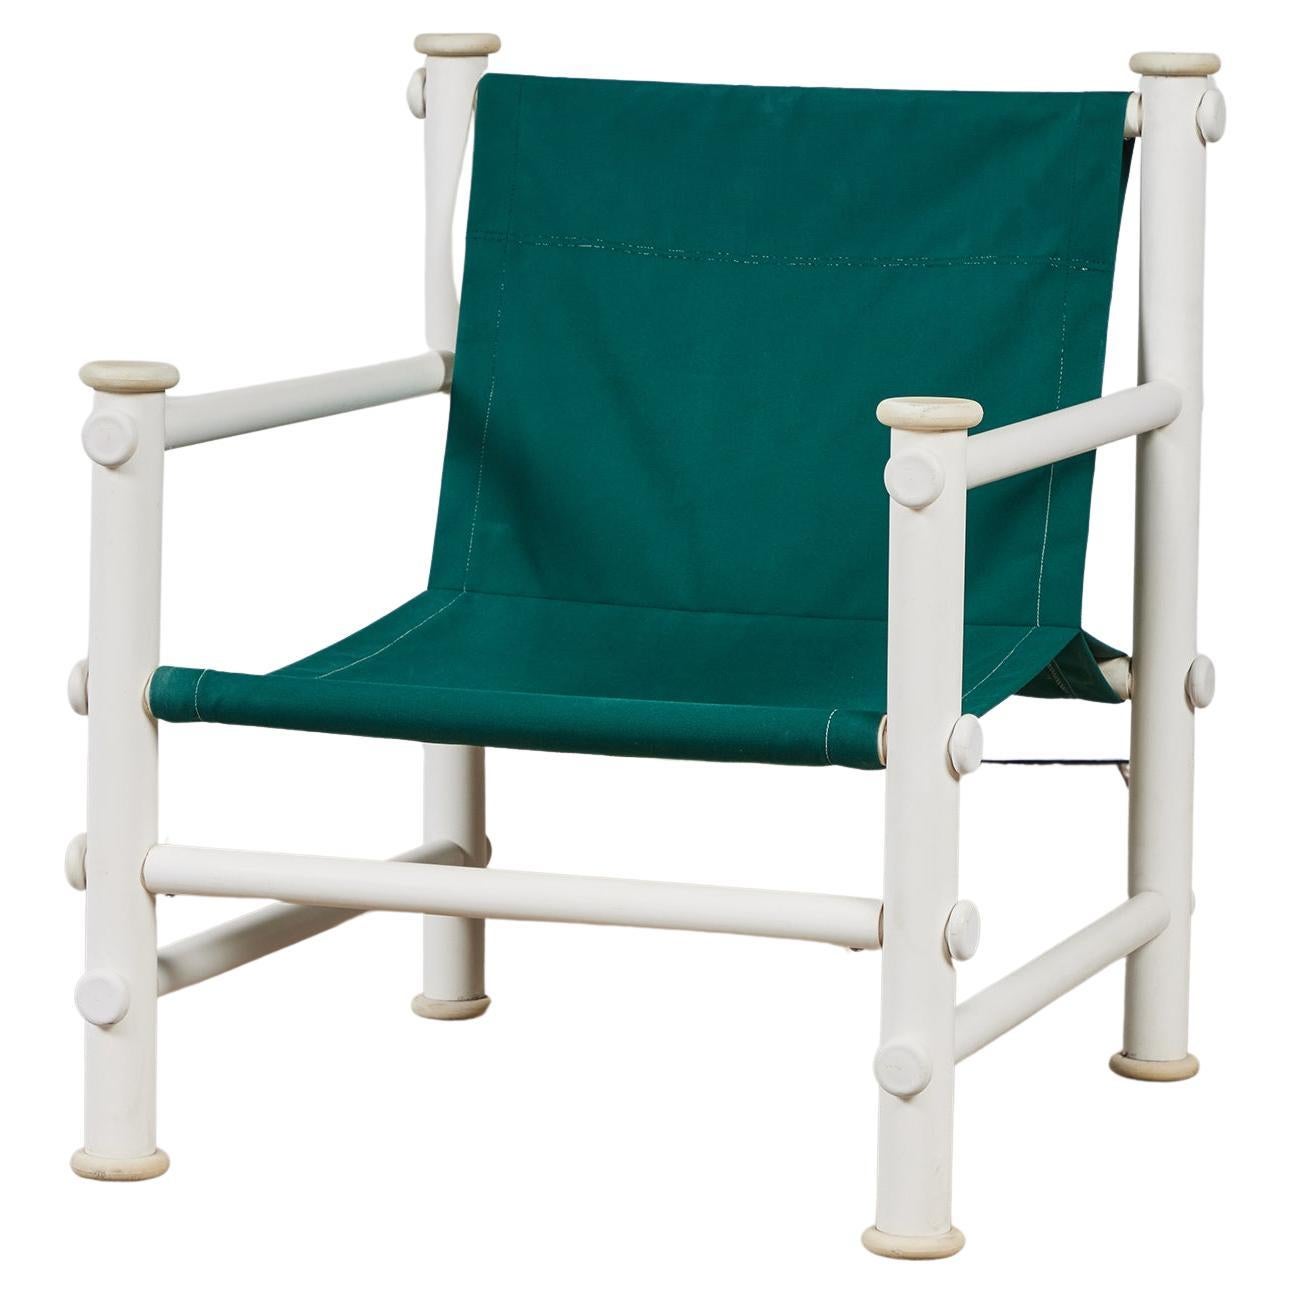 Jerry Johnson Outdoor "Idyllwild" Sling Lounge Chair For Sale